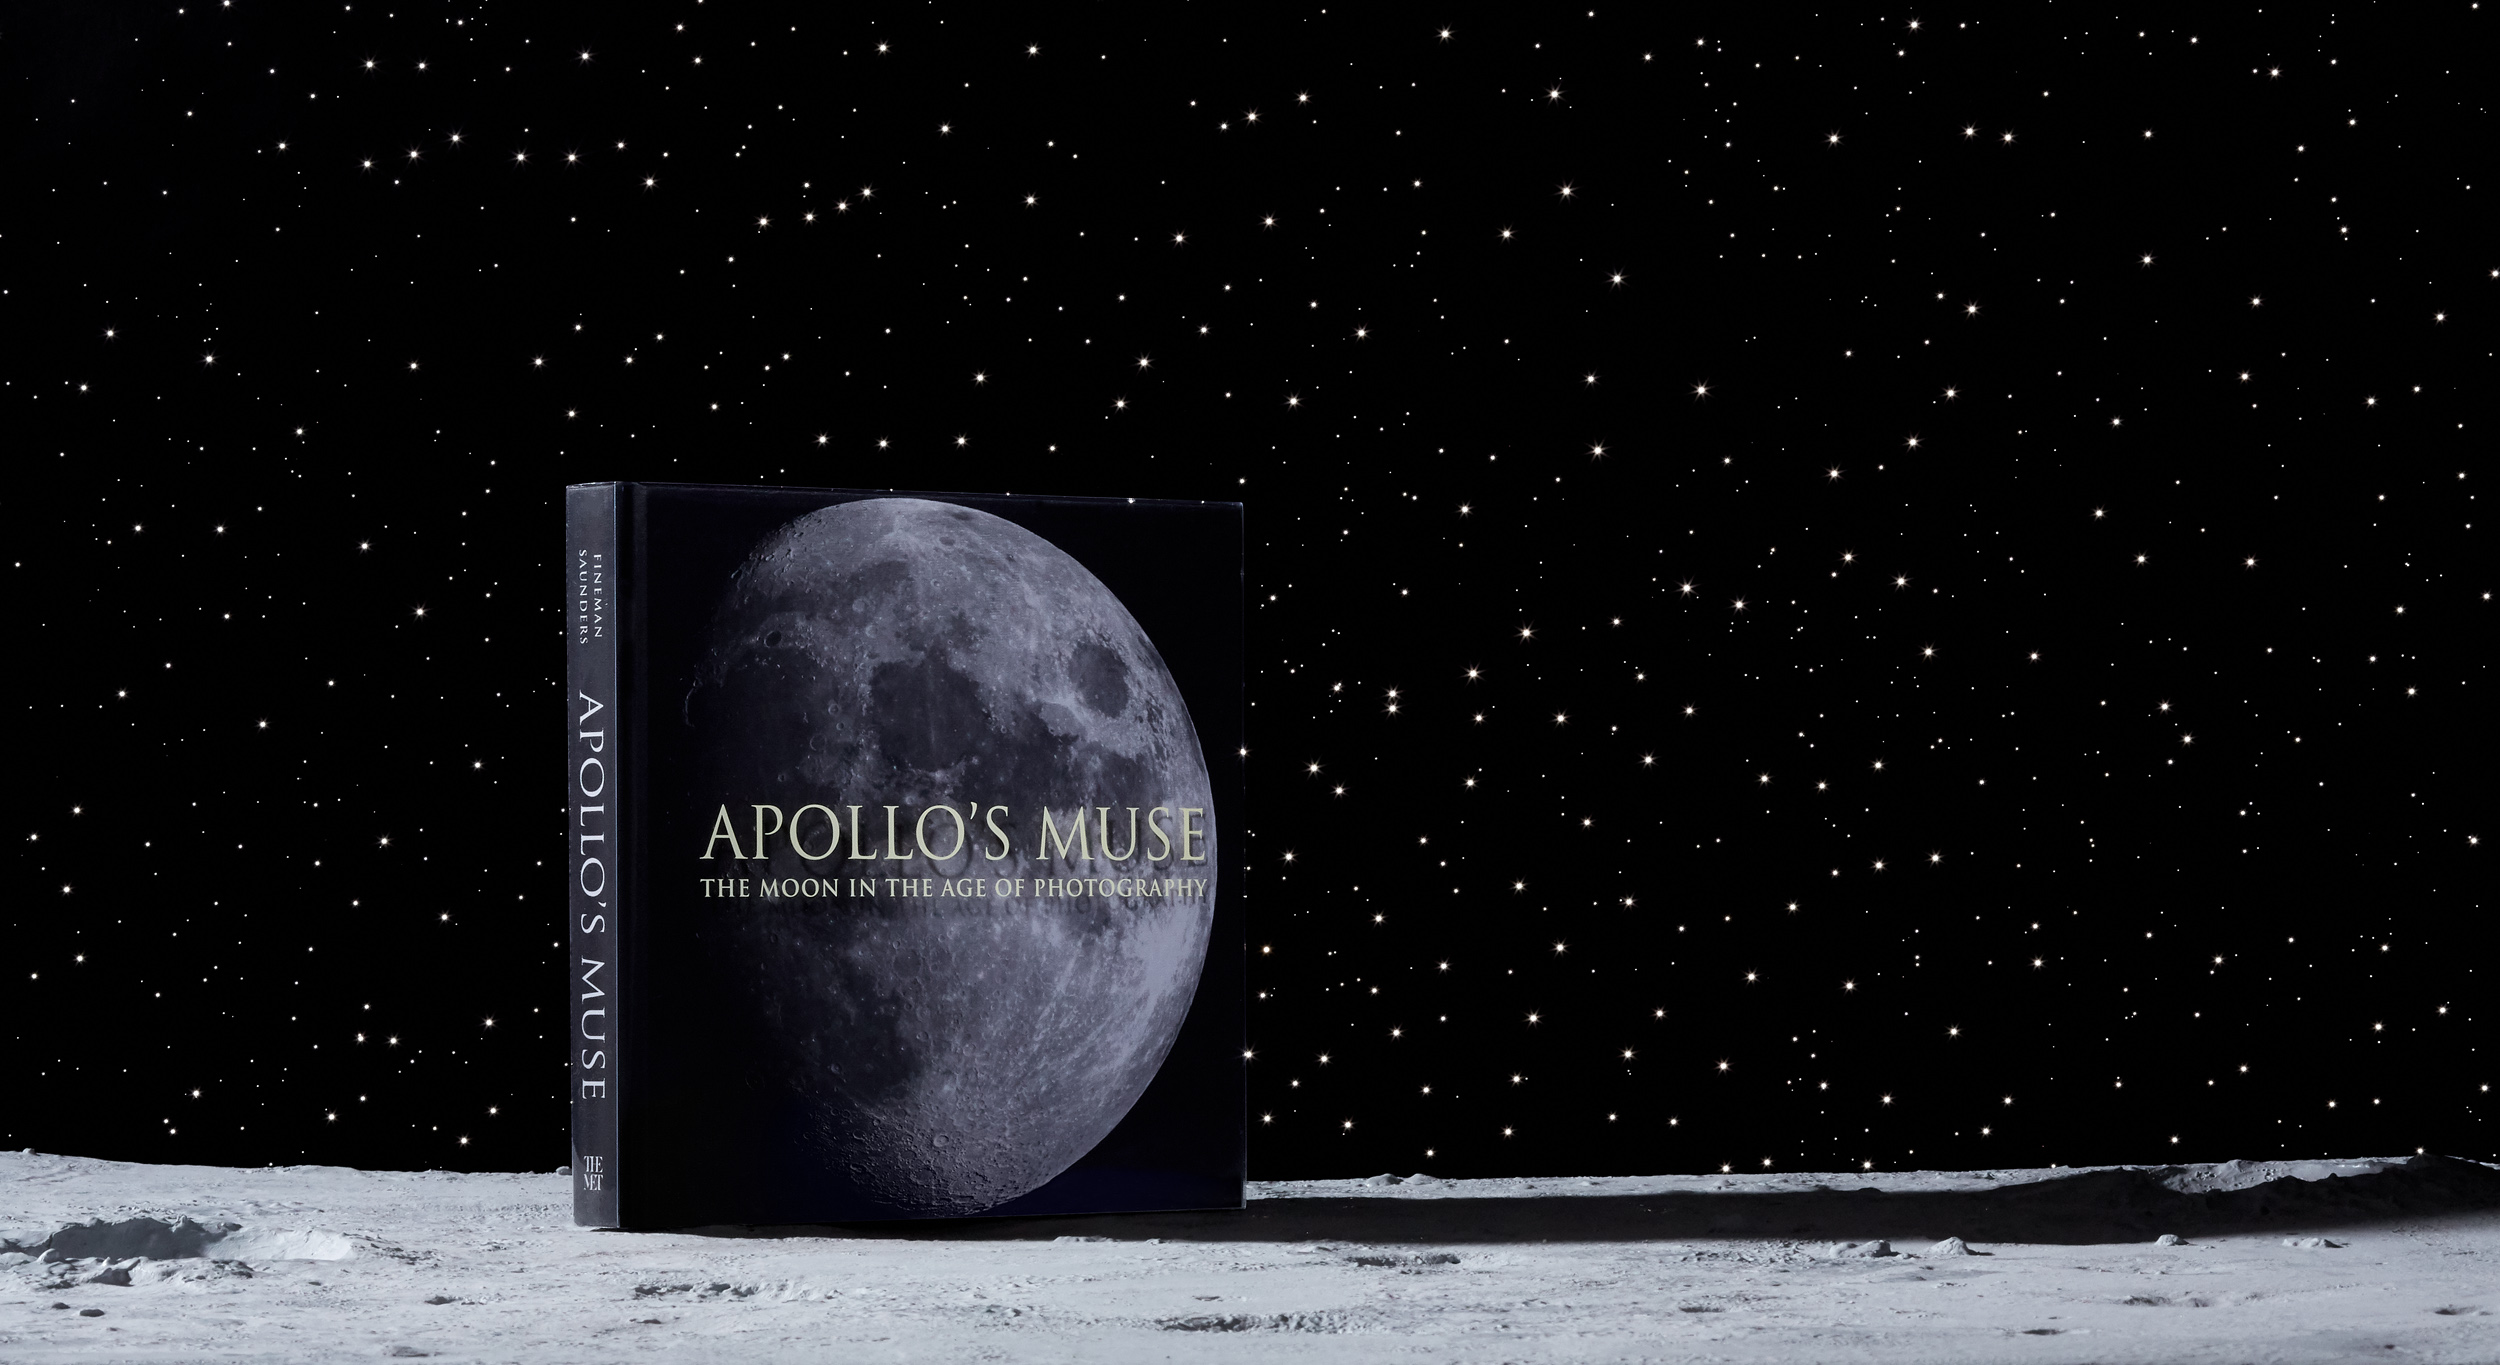 marketing still life photograph of the Apollo's Muse exhibition catalog book on the moon with a star-field background